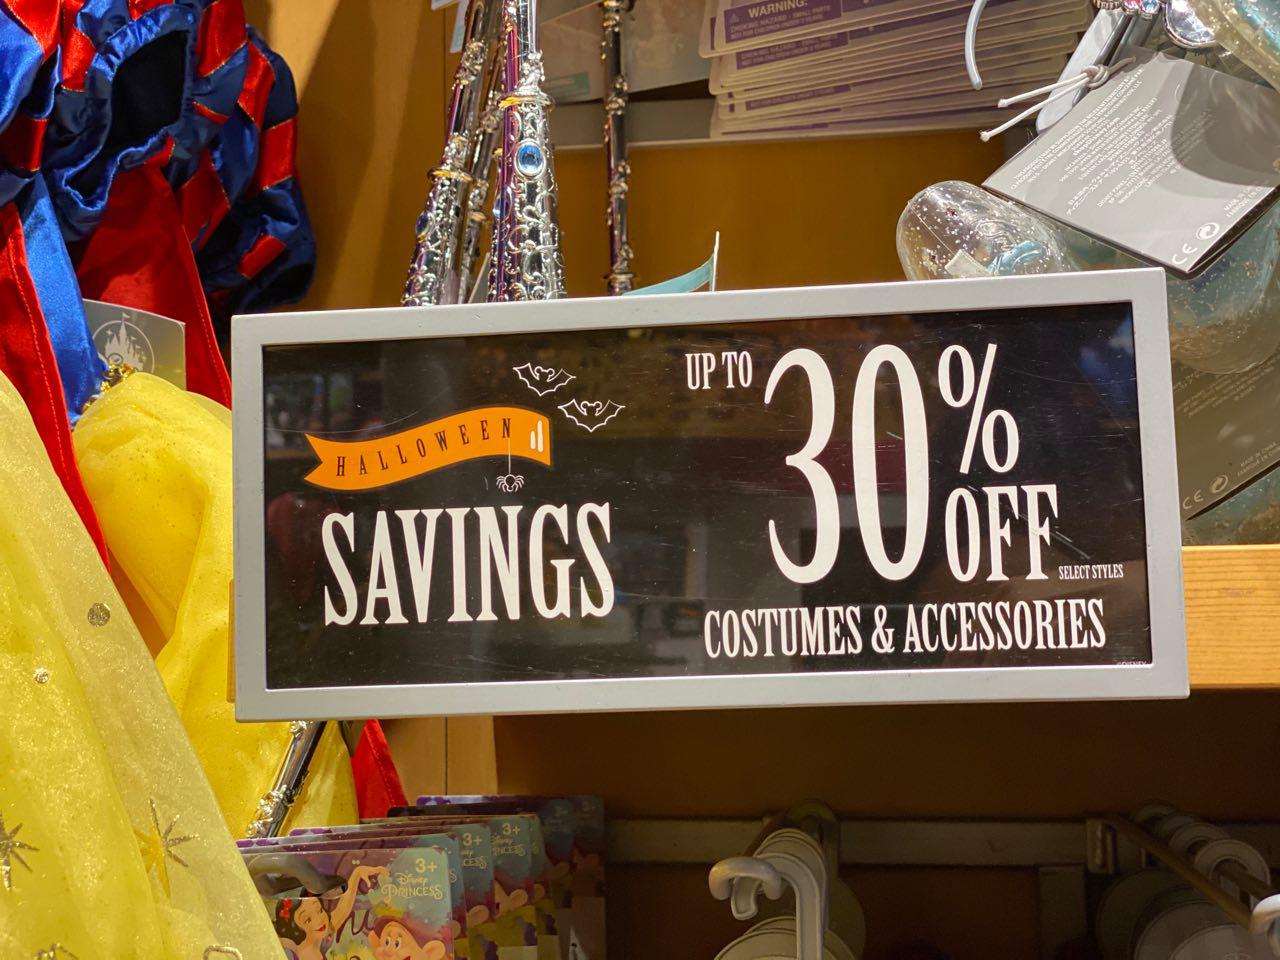 Disney Store 30% OFF Costumes and Accessories